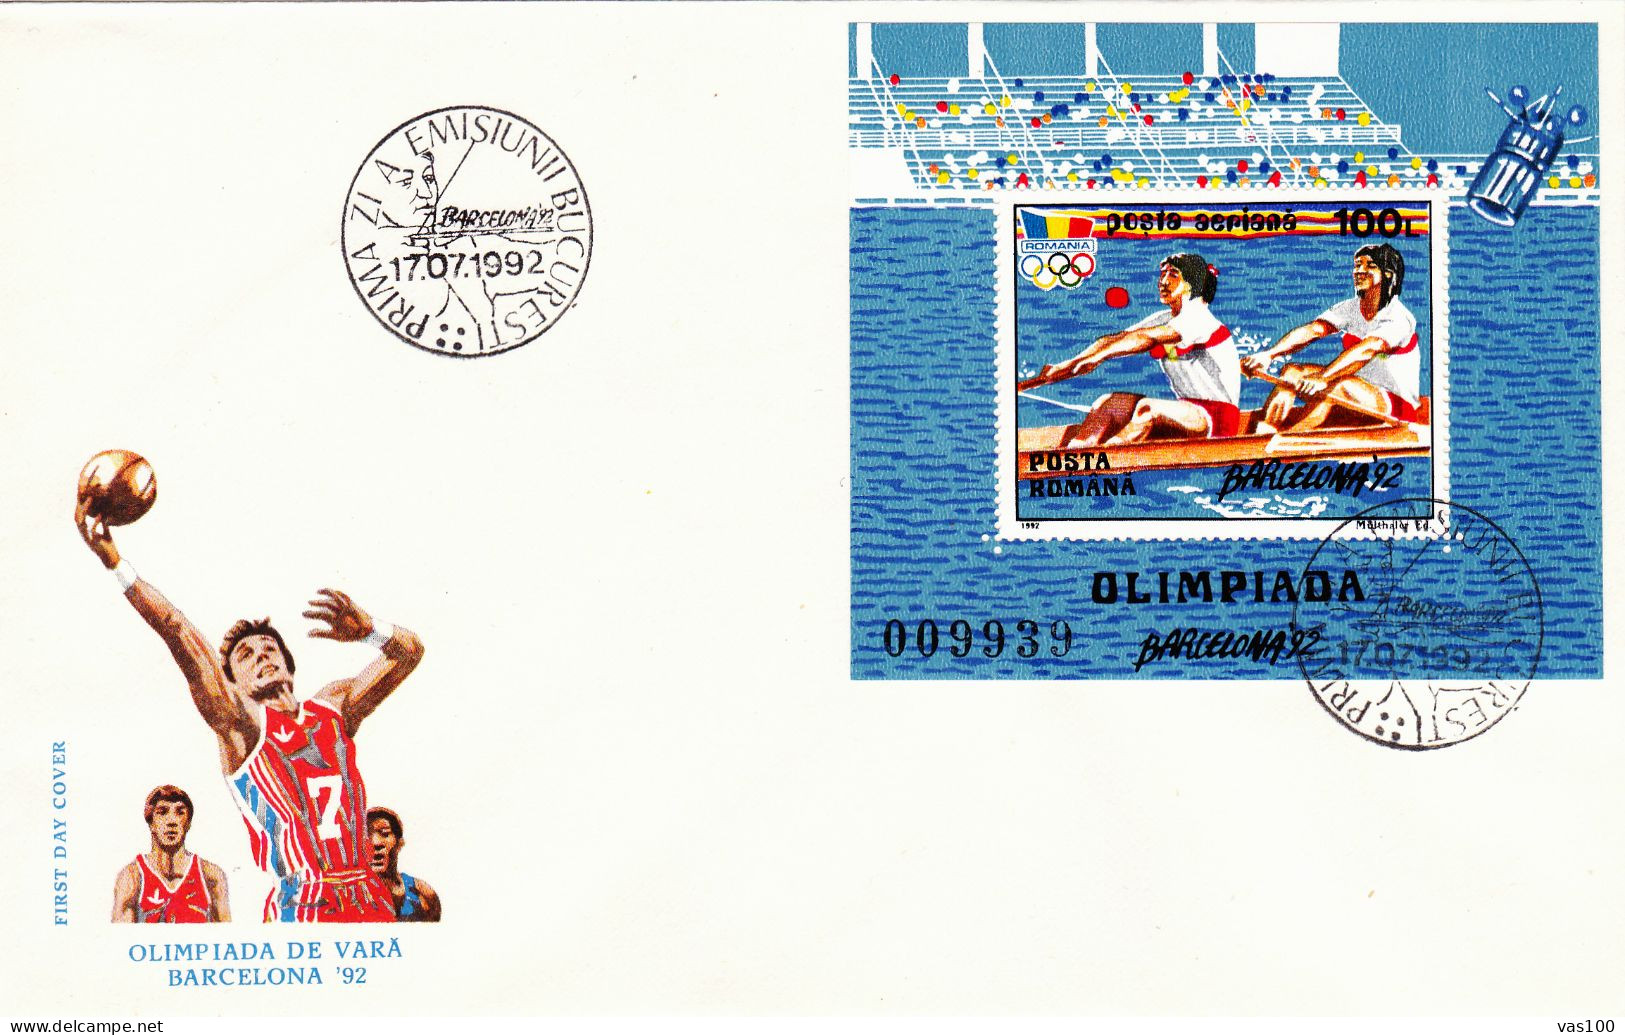 OLYMPIC GAMES, BARCELONA'92, SUMMER, ROWING, BASKETBALL, COVER FDC, 1992, ROMANIA - FDC